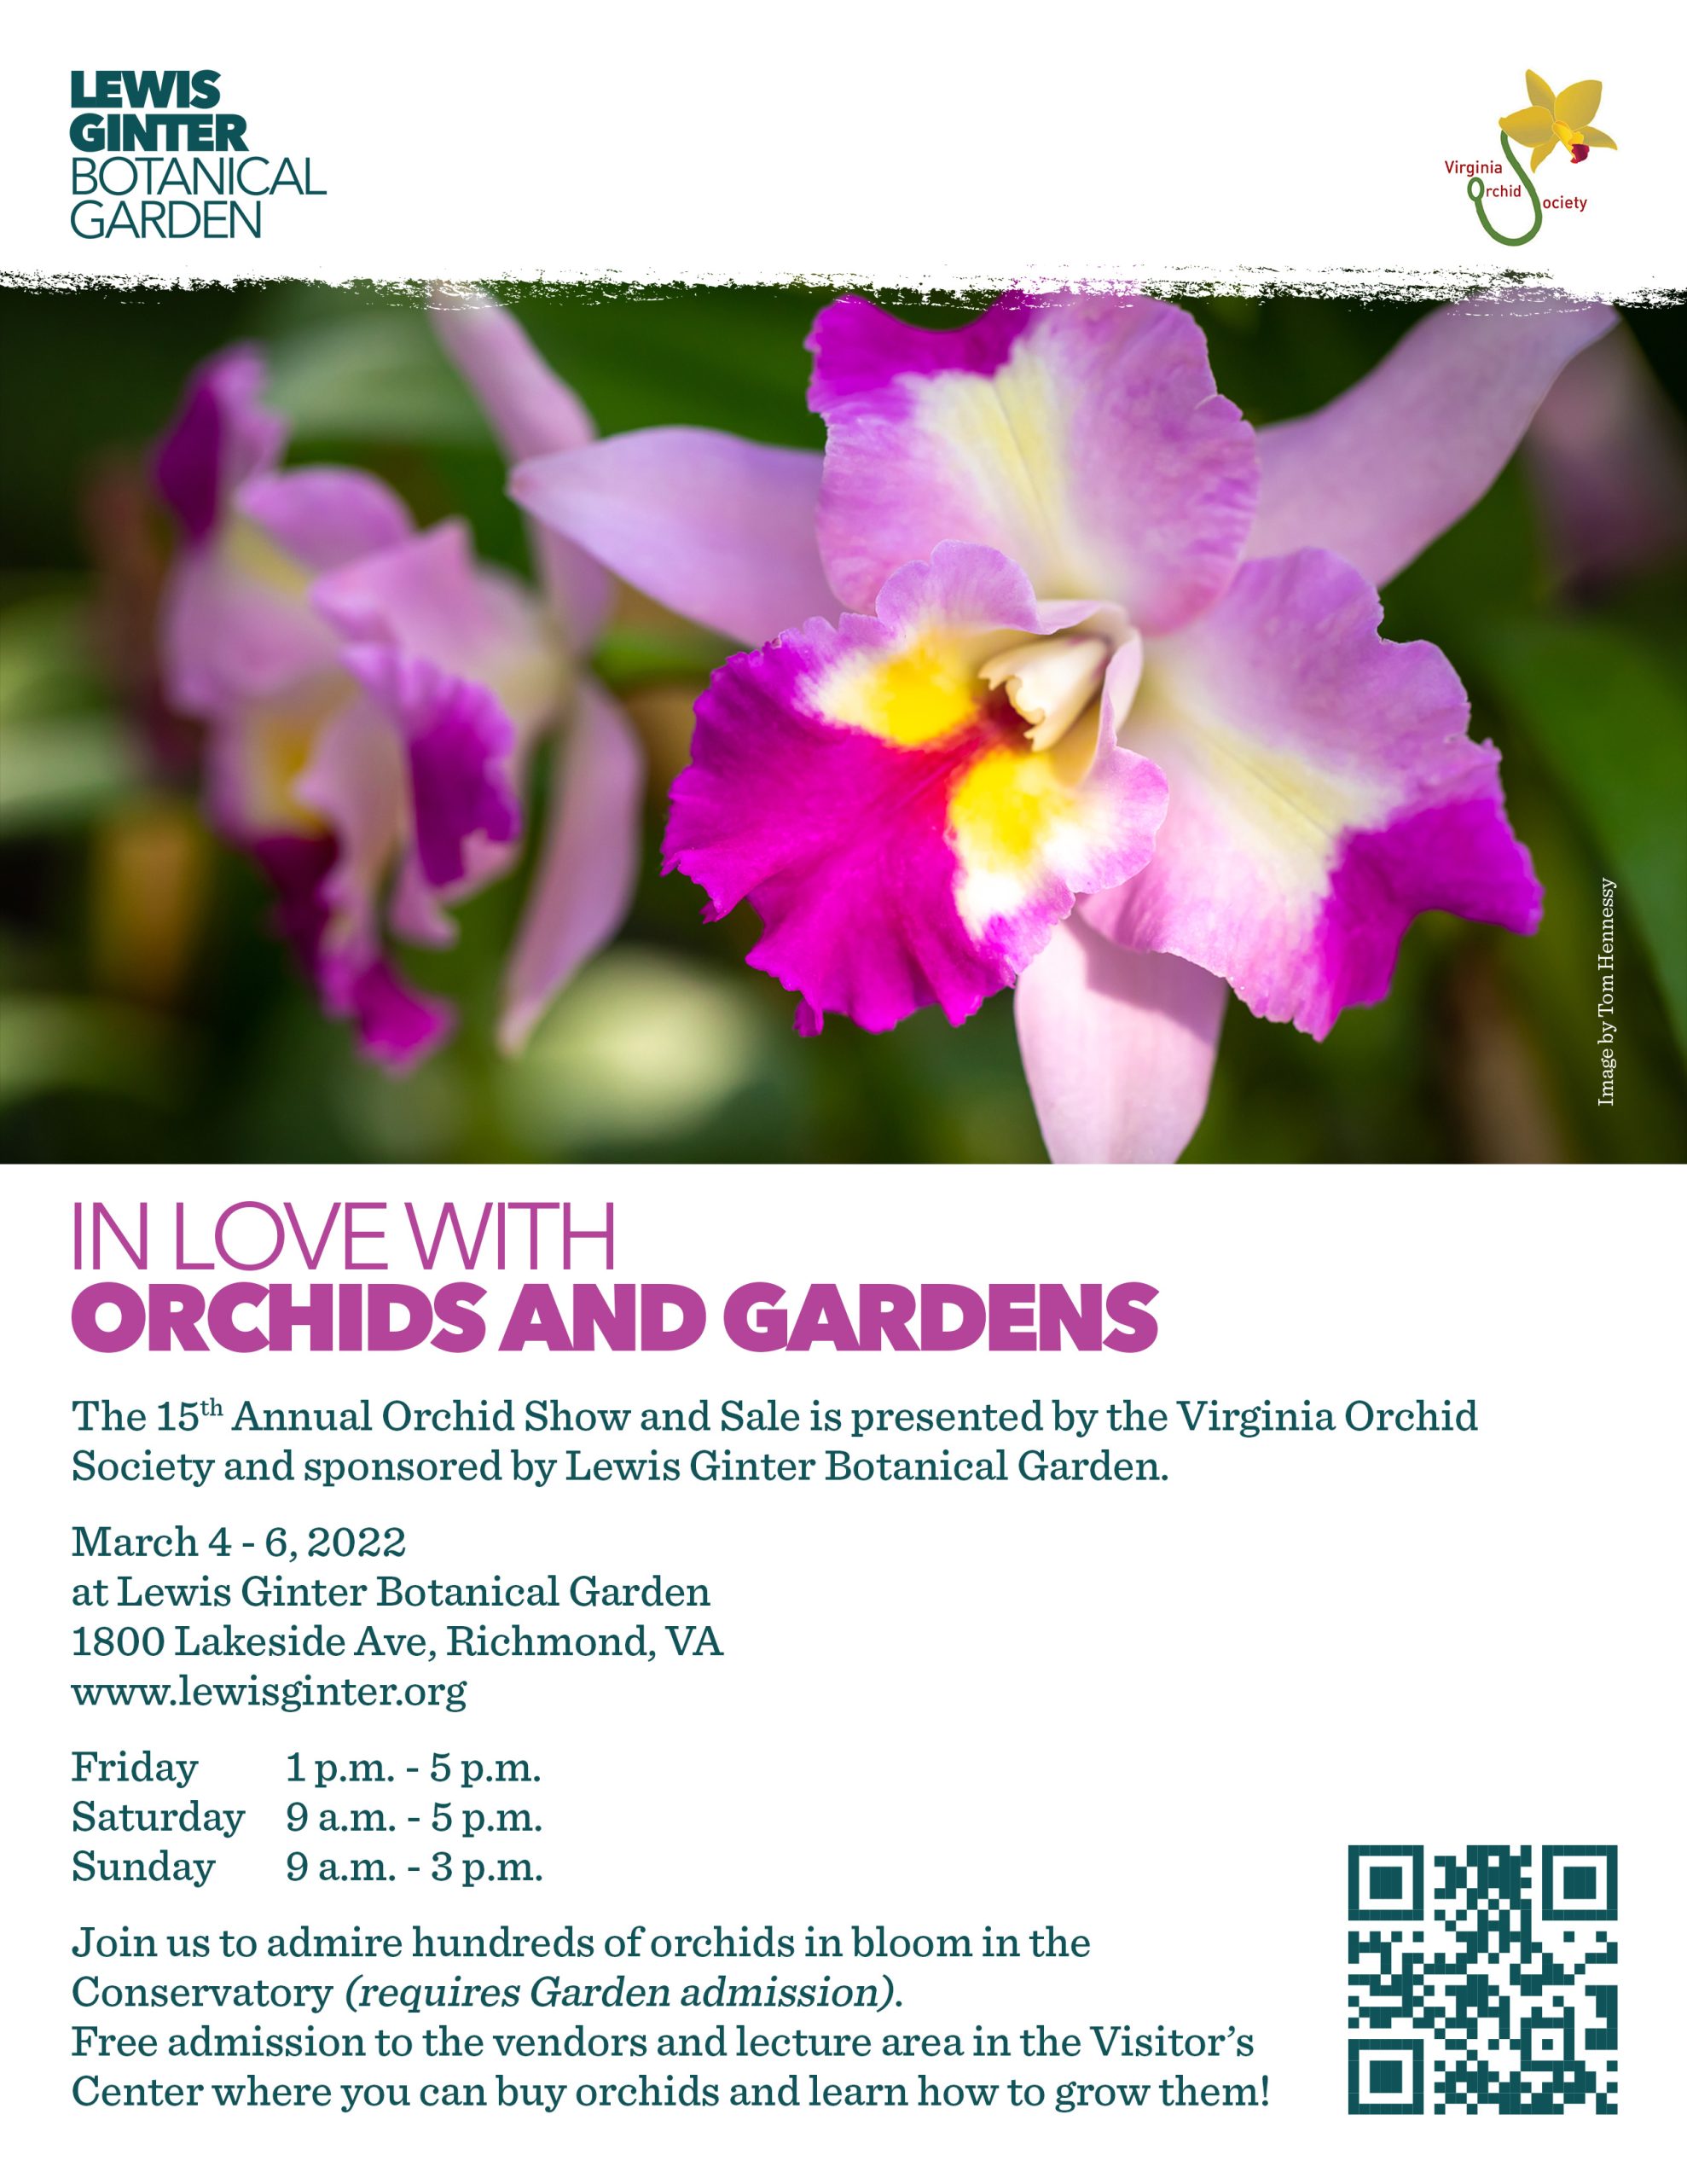 Orchid show flyer